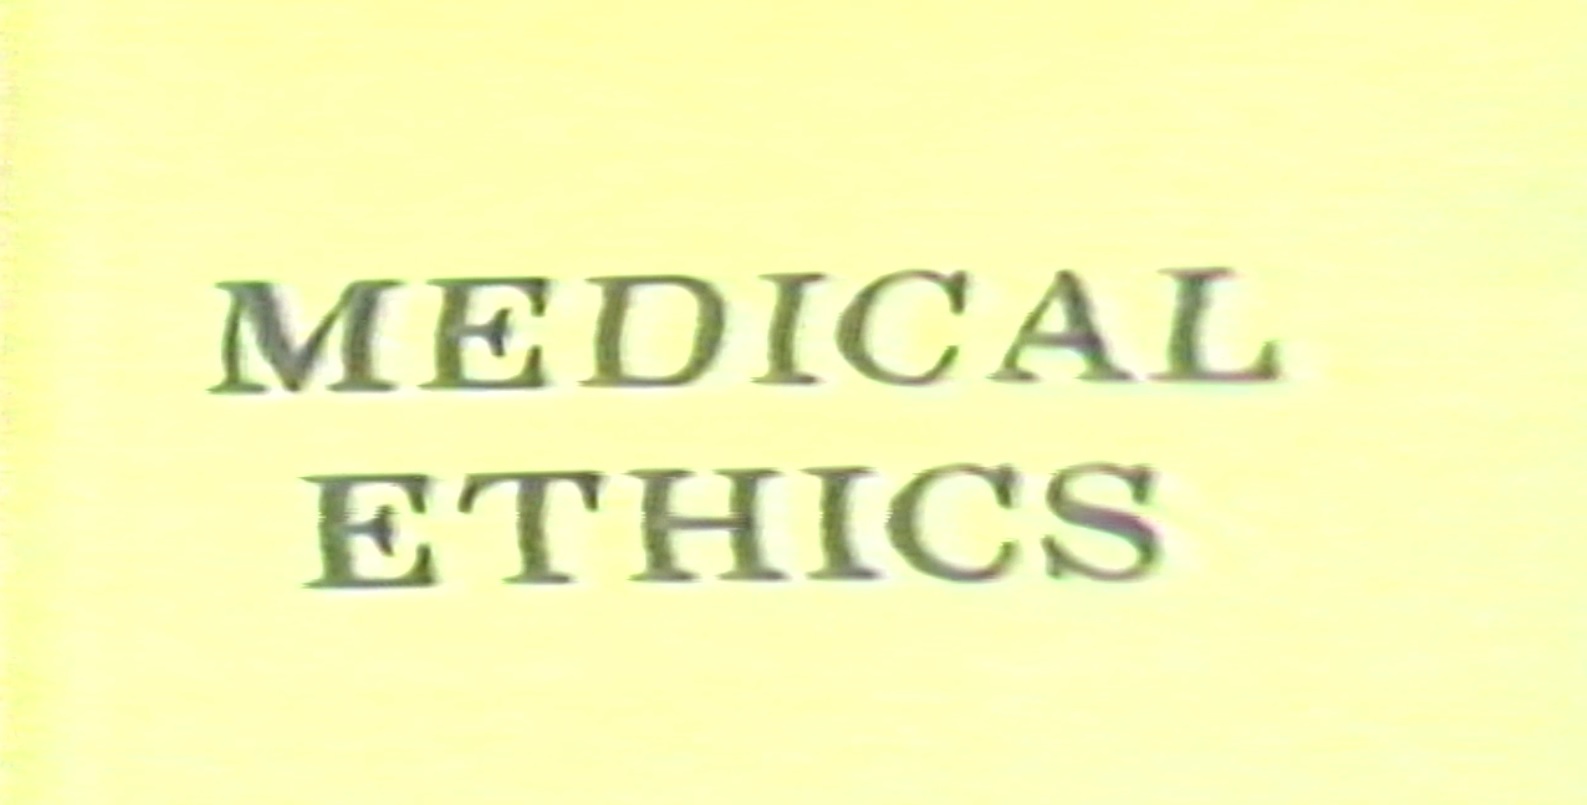 Codes of Medical Ethics